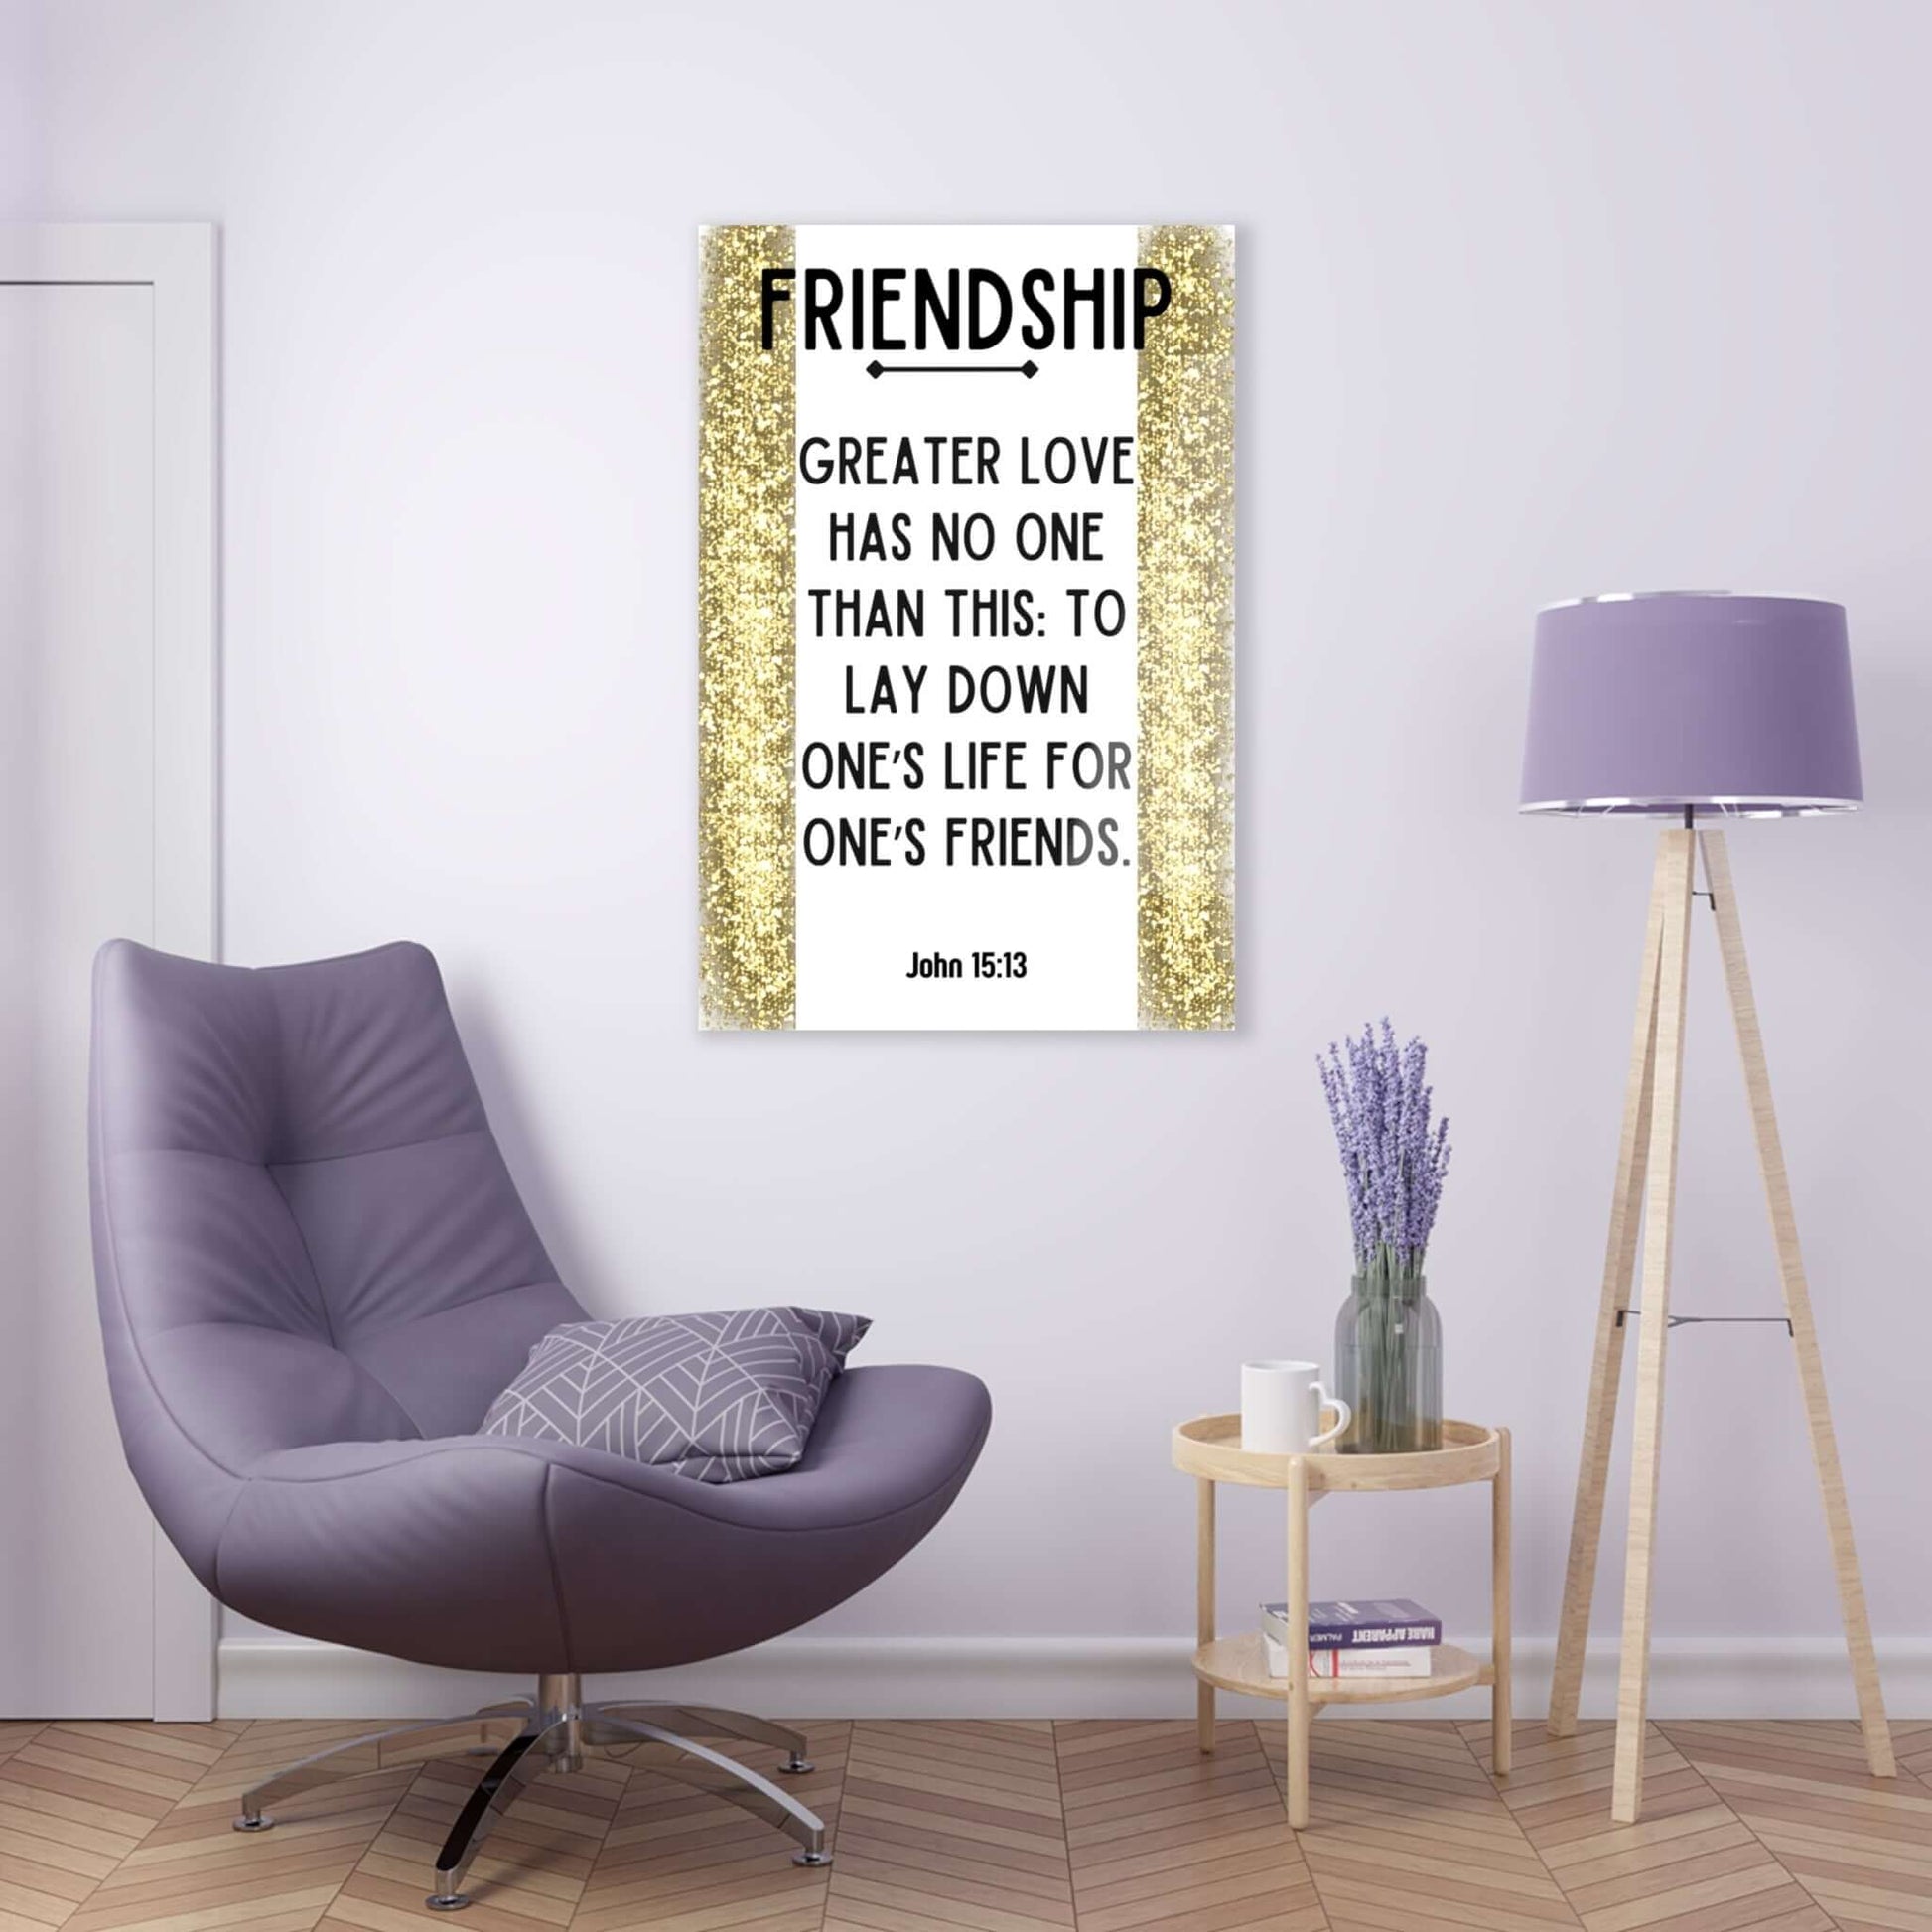 Gold Wall Decor: Stunning Acrylic Print with Inspiring Scripture | Art & Wall Decor,Assembled in the USA,Assembled in USA,Decor,Home & Living,Home Decor,Indoor,Made in the USA,Made in USA,Poster